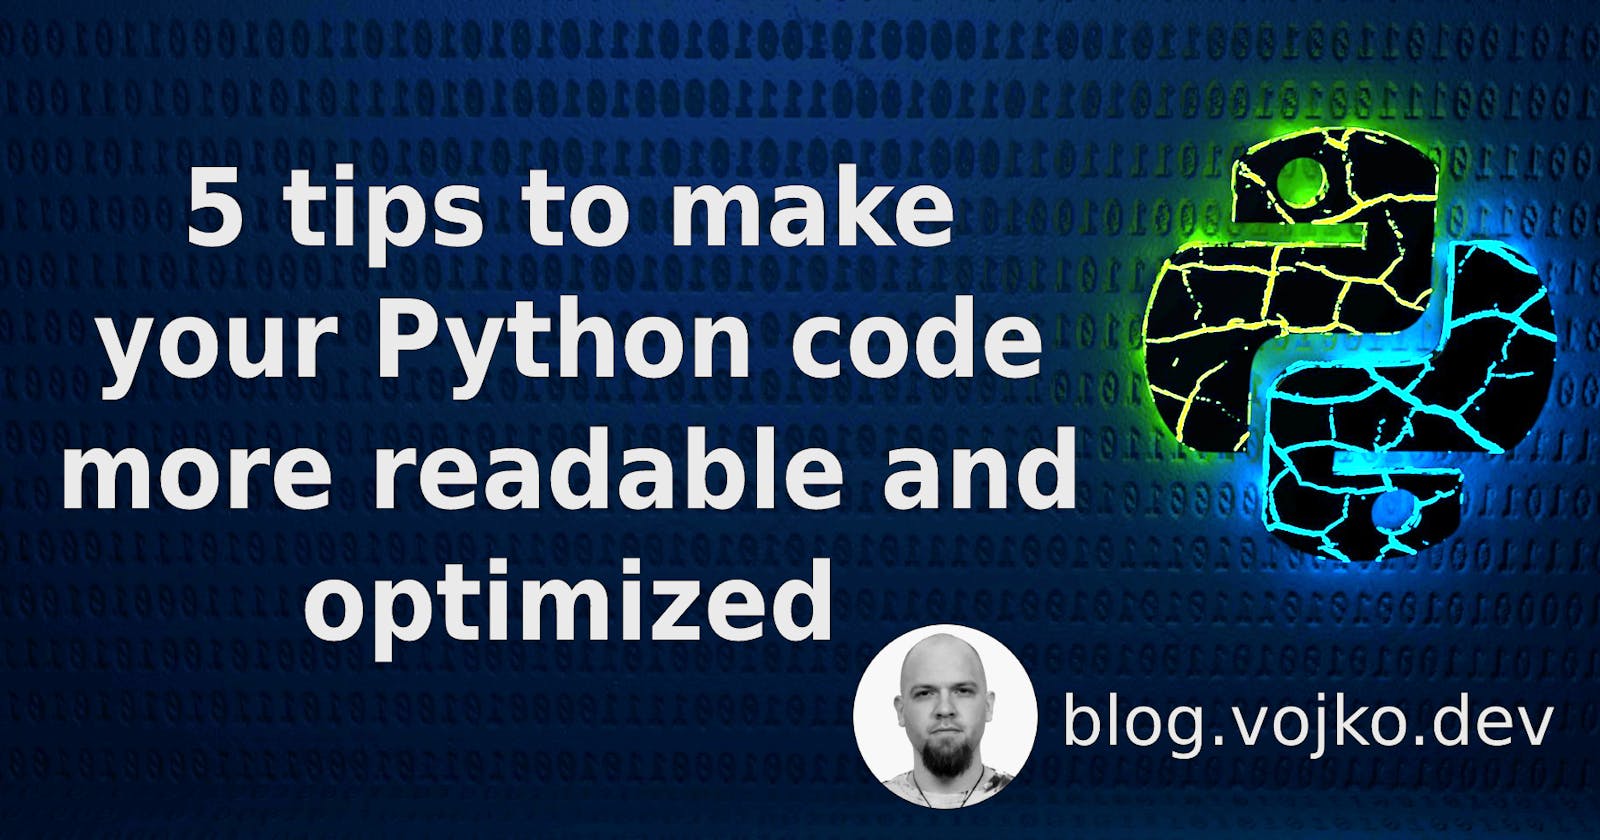 Five simple tips to make your Python code more readable and optimized